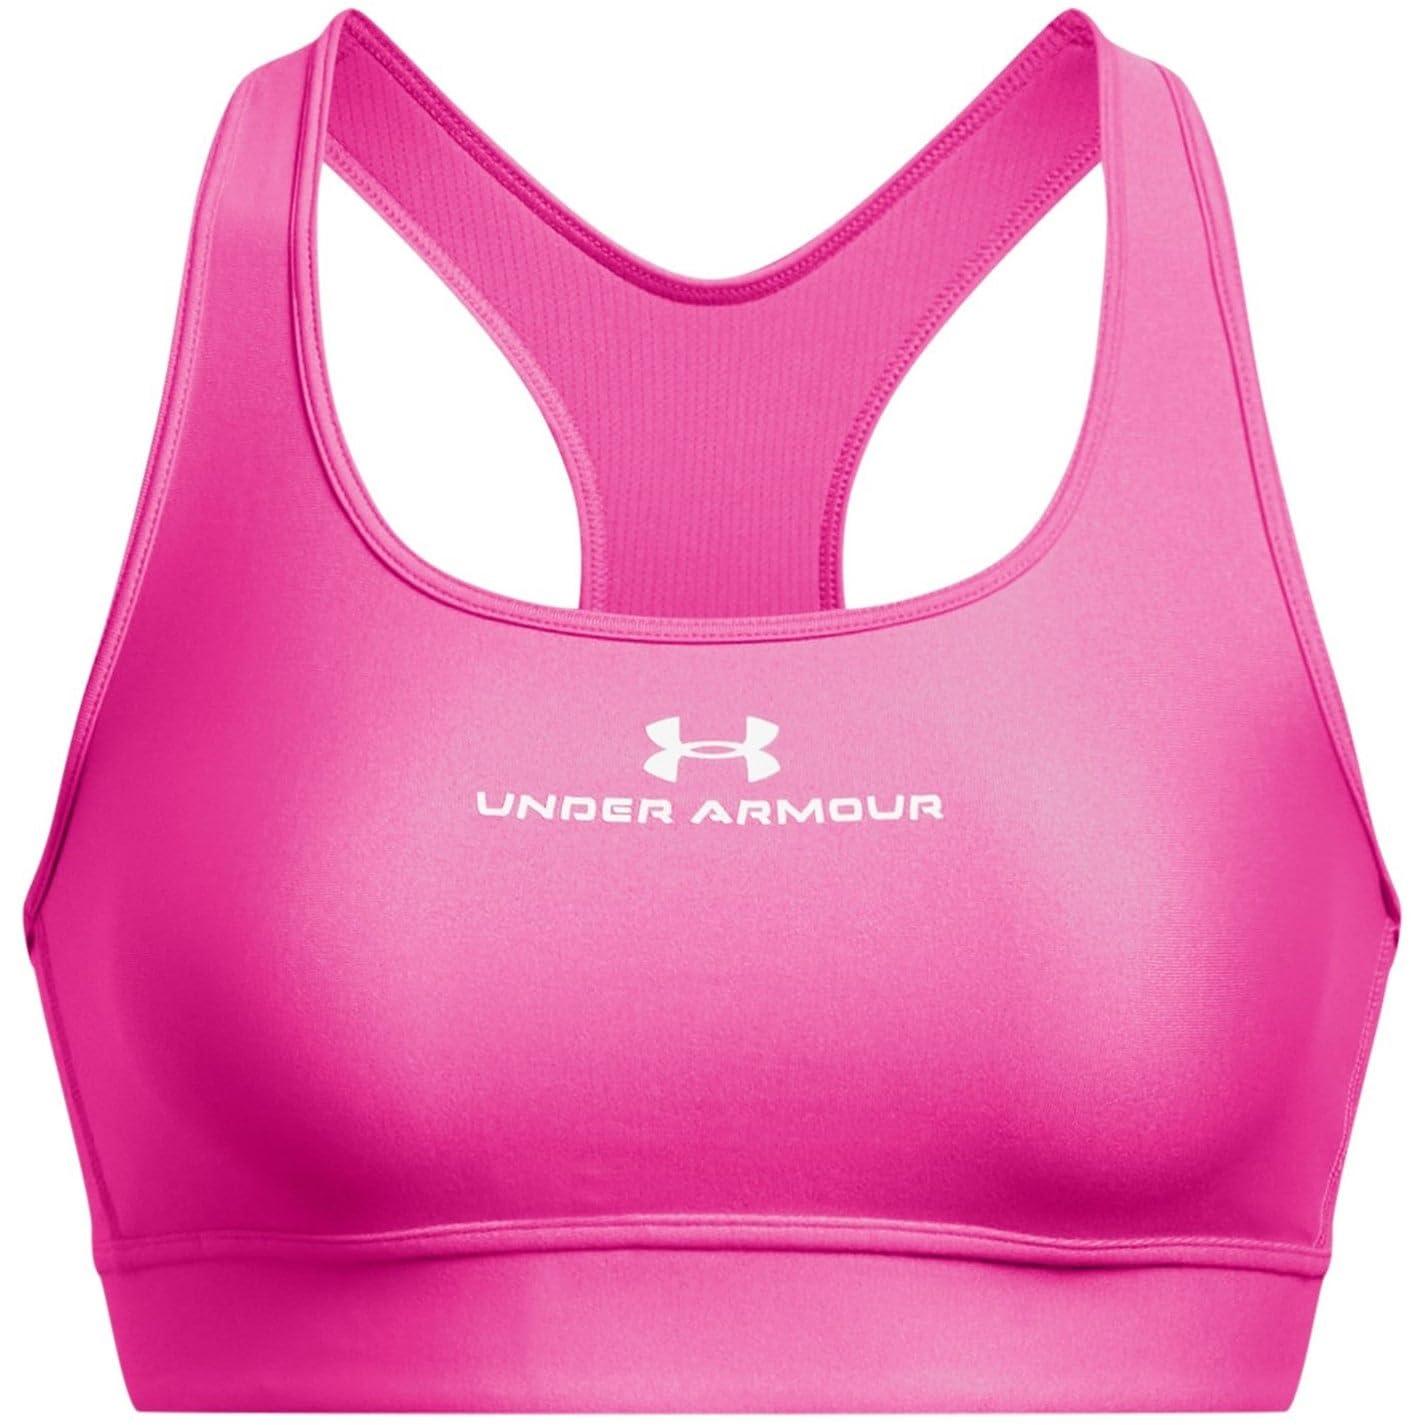 Under Armour crossback mid support emboss bra with graphic print in black